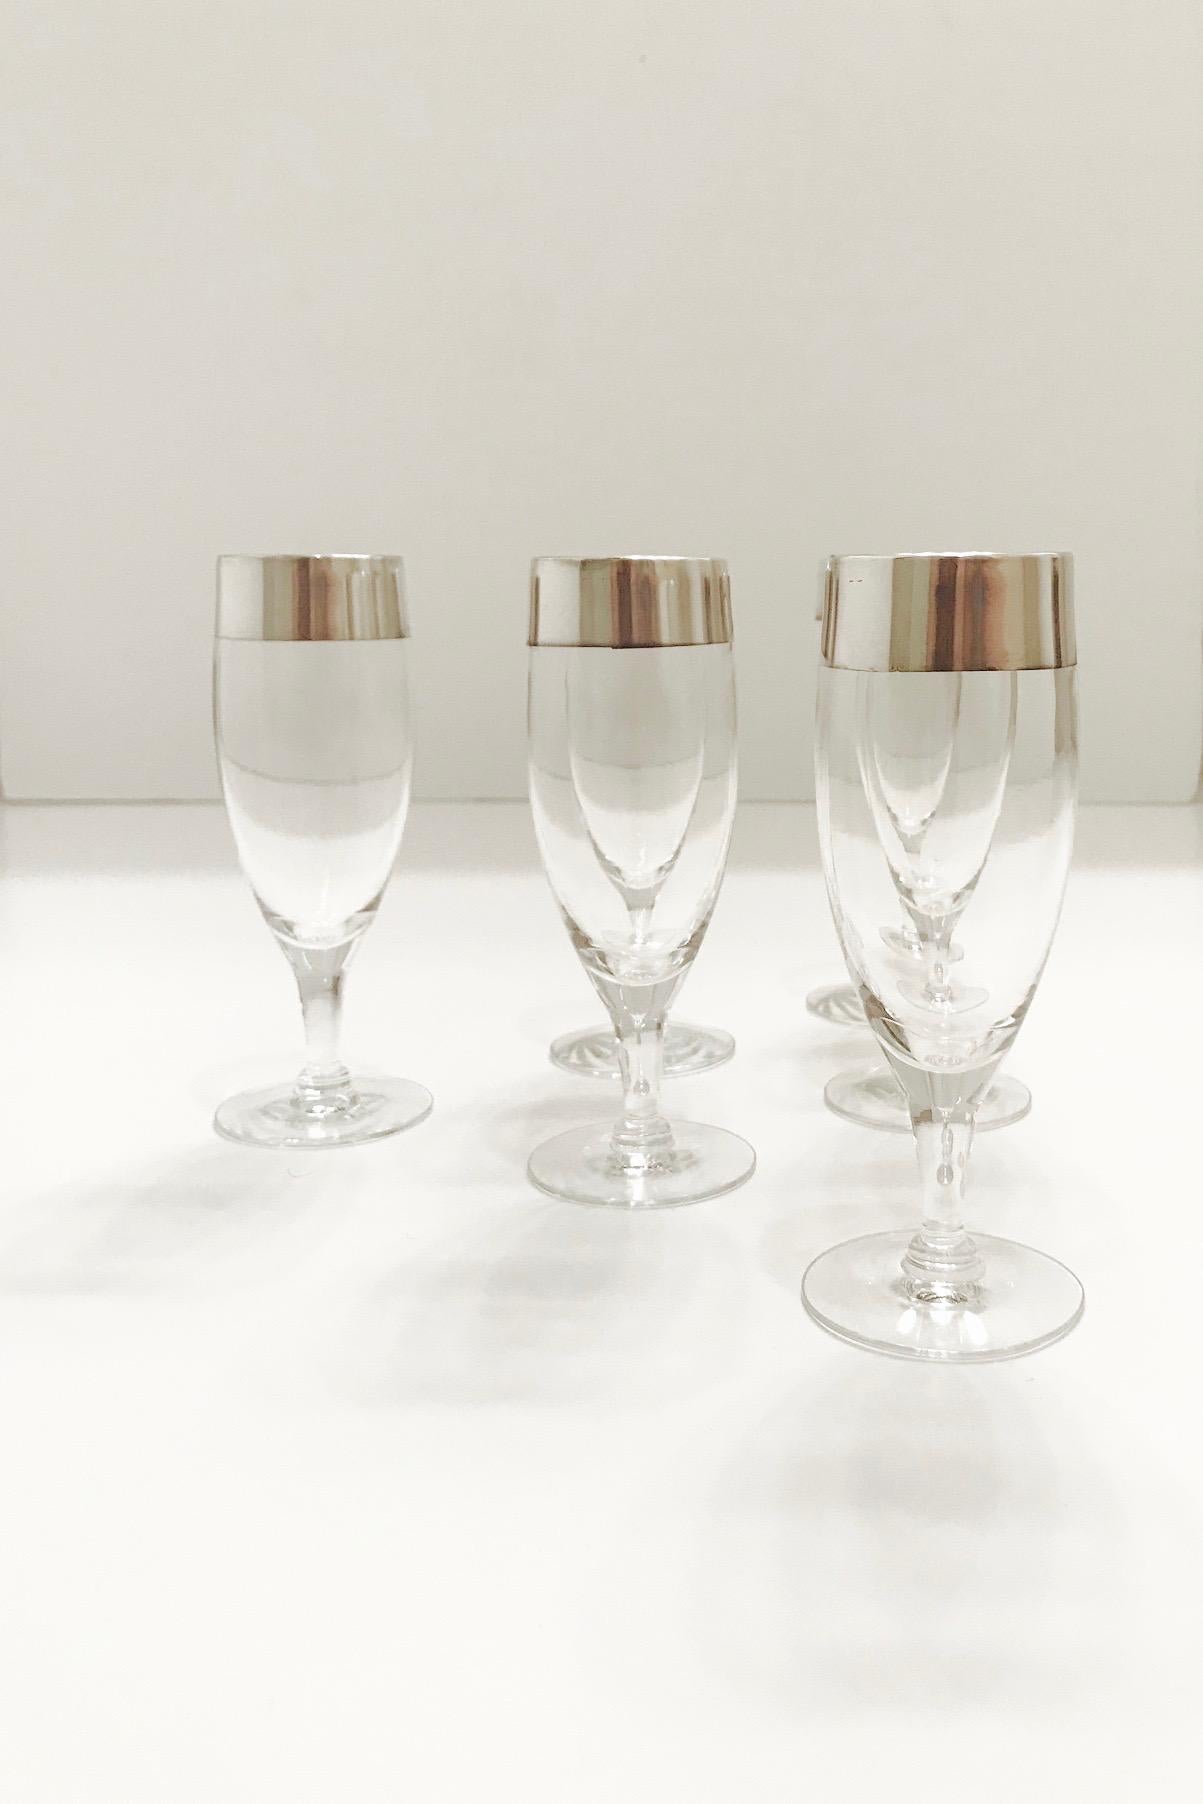 Mid-20th Century Set of Six Champagne Flutes with Sterling Silver Overlay by Dorothy Thorpe, 1950